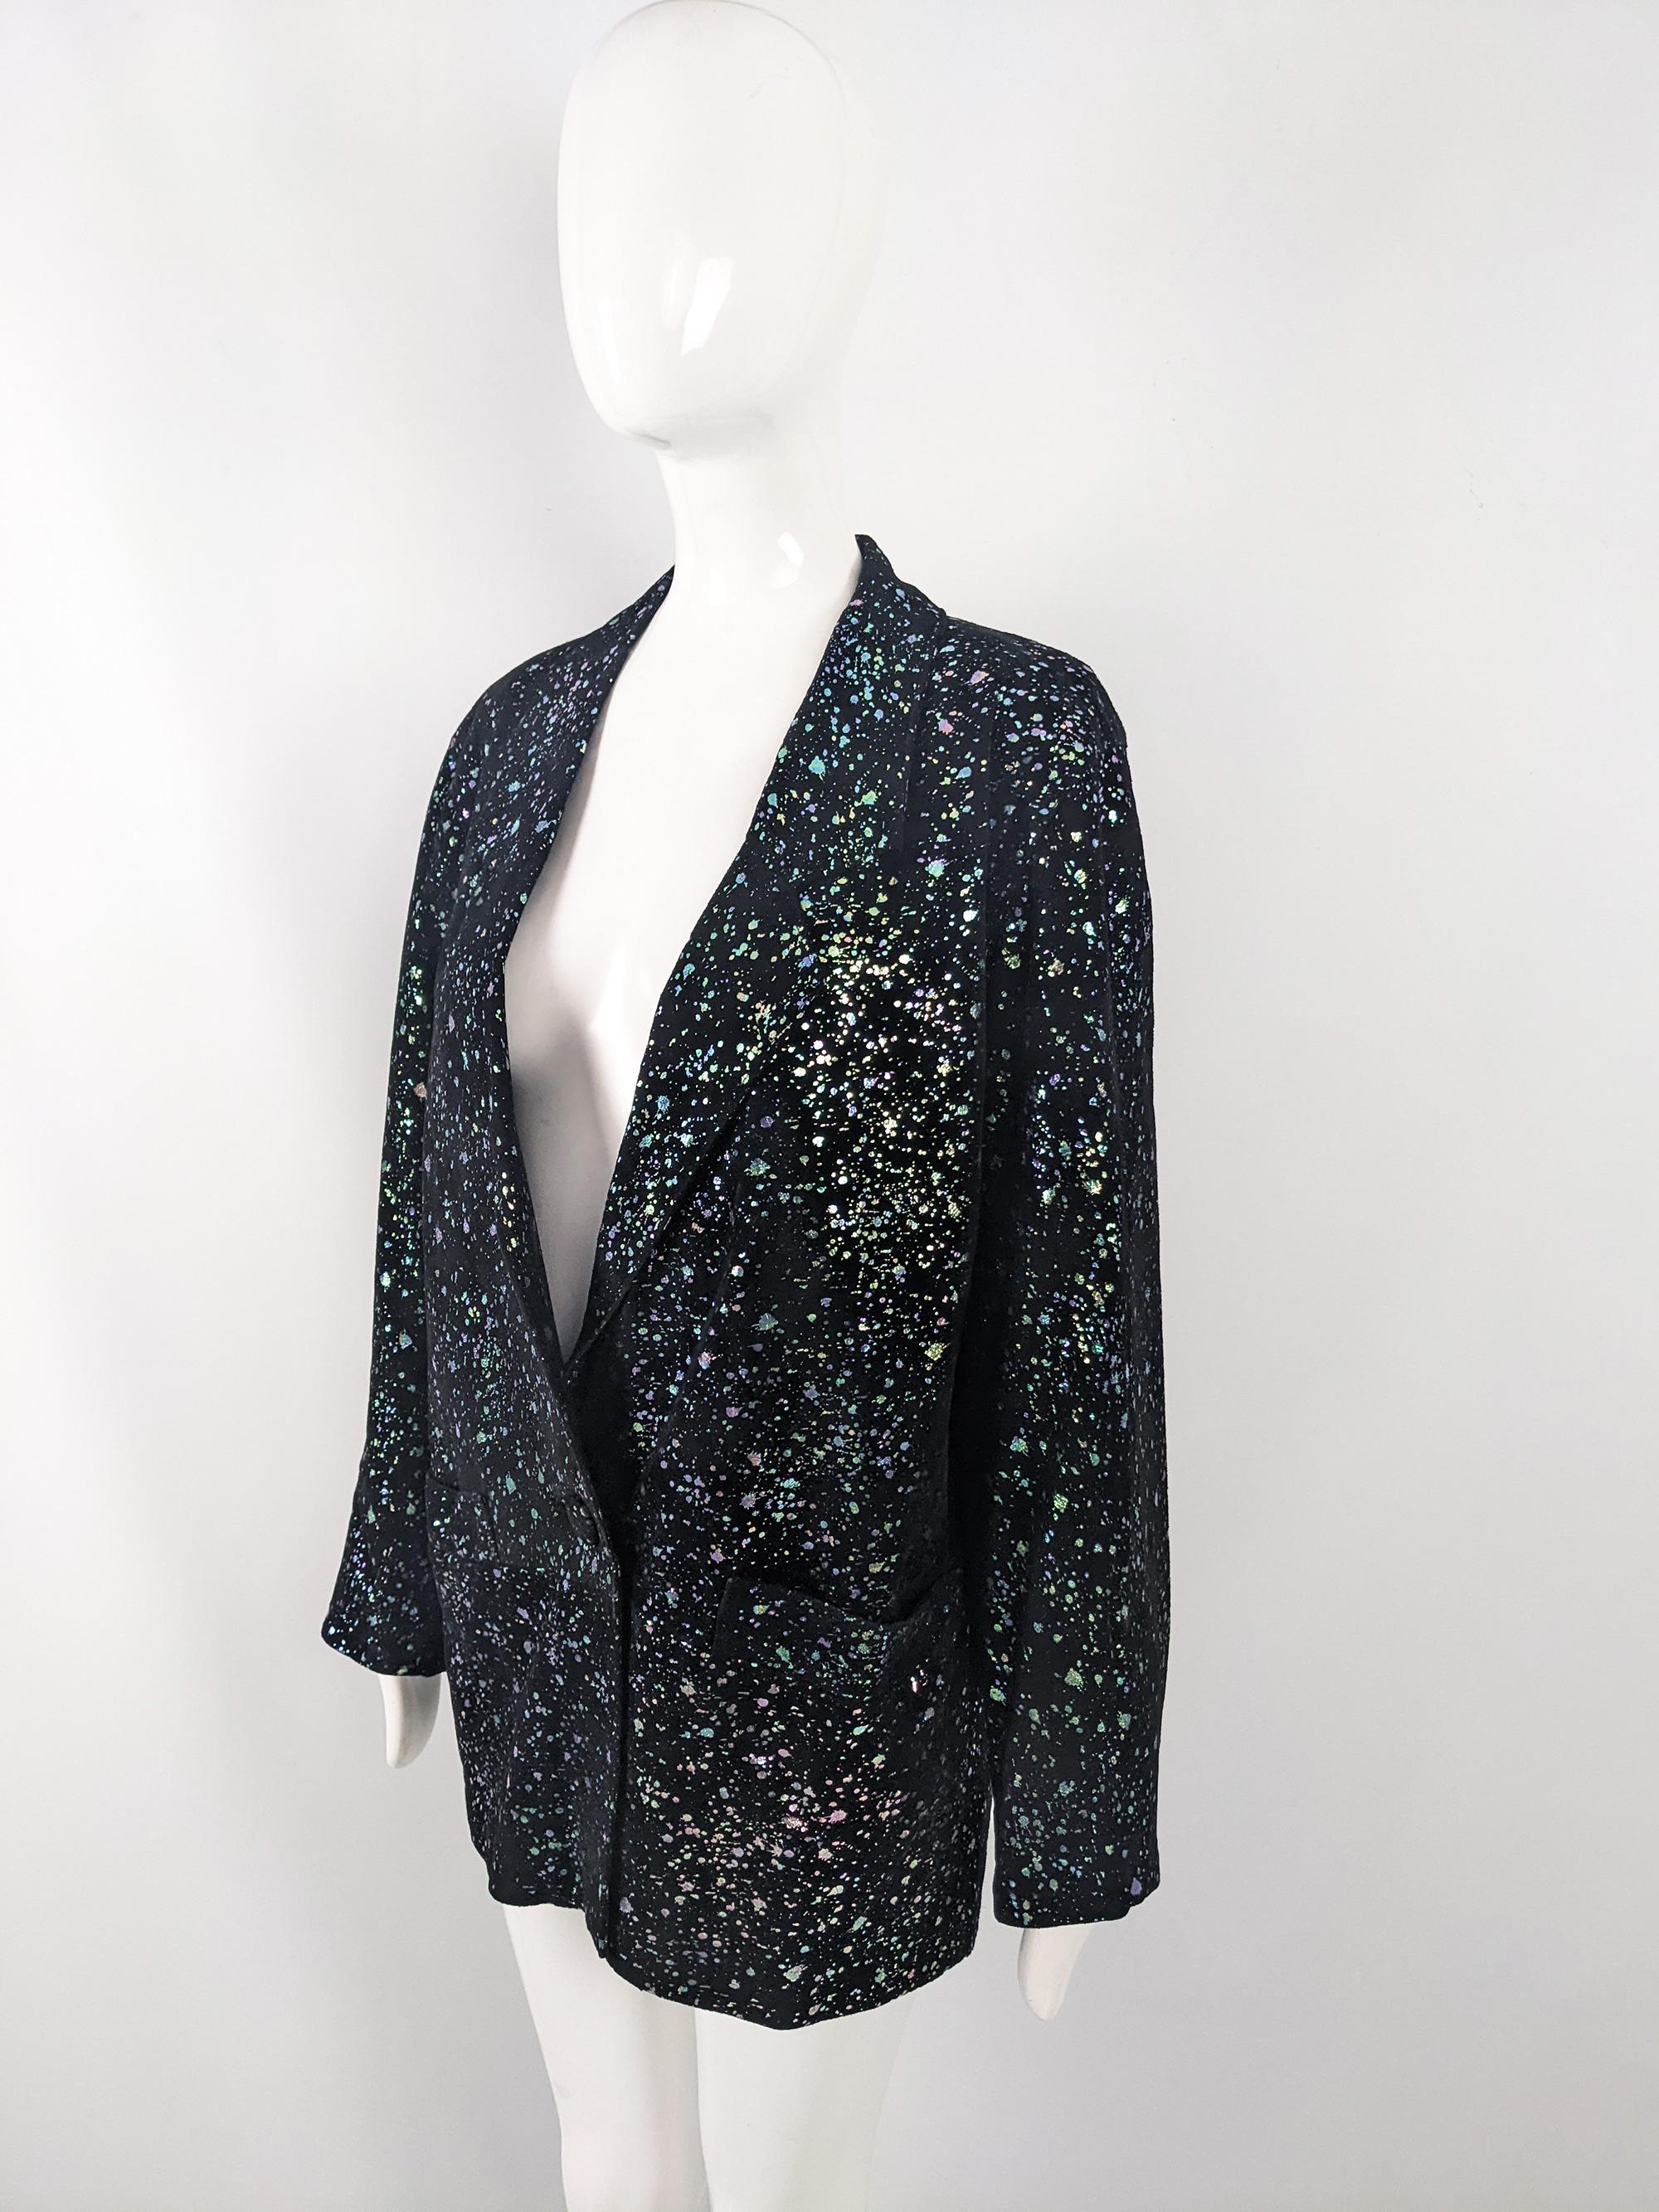 Gavin Brown Vintage 80s Black Suede Holographic Iridescent Print Jacket, 1980s In Good Condition For Sale In Doncaster, South Yorkshire